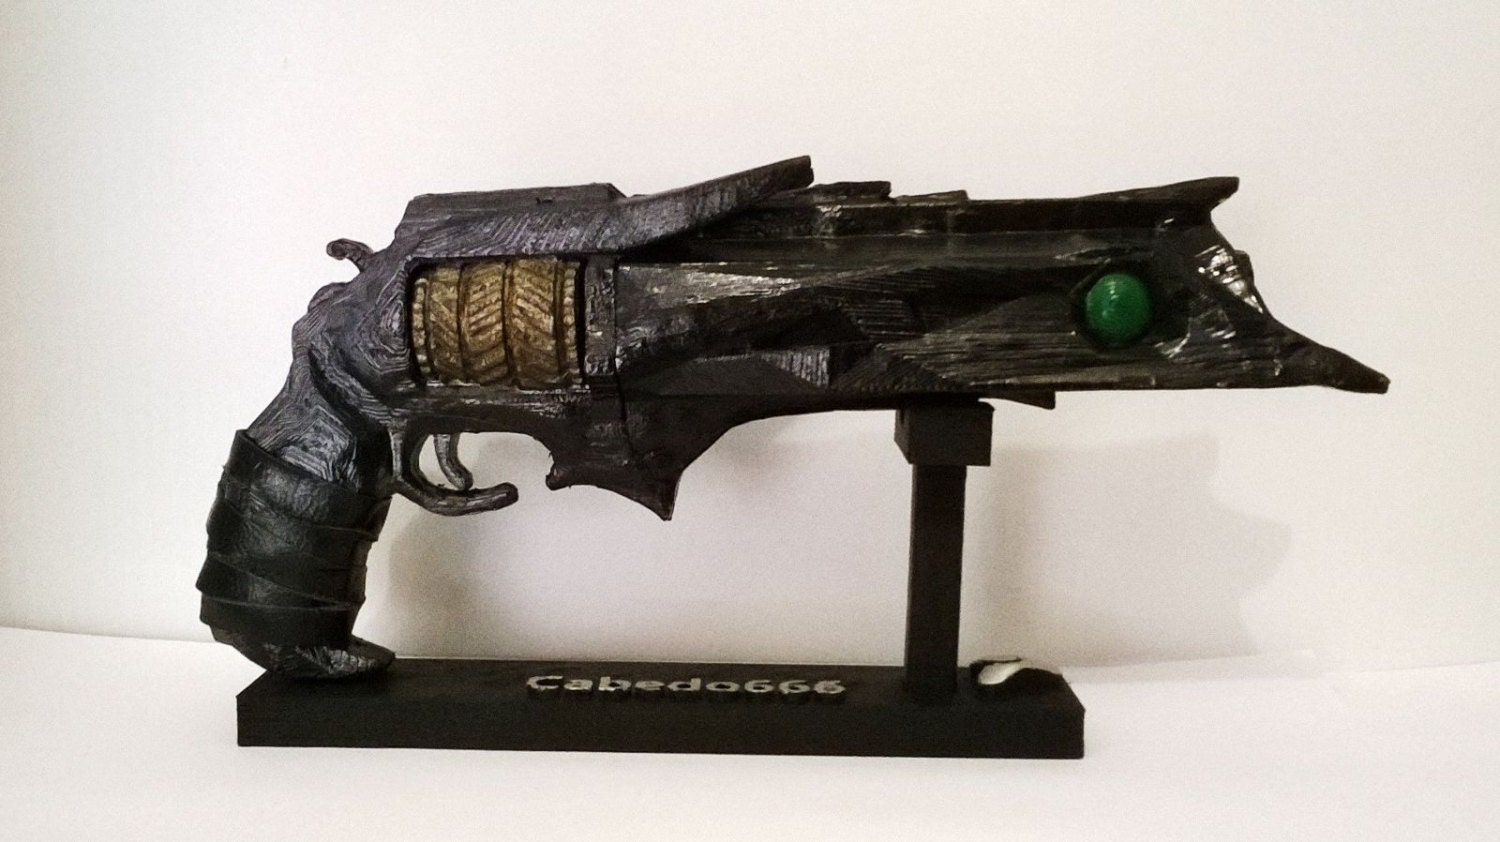 Customized replica inspired in Thorn 3D printed